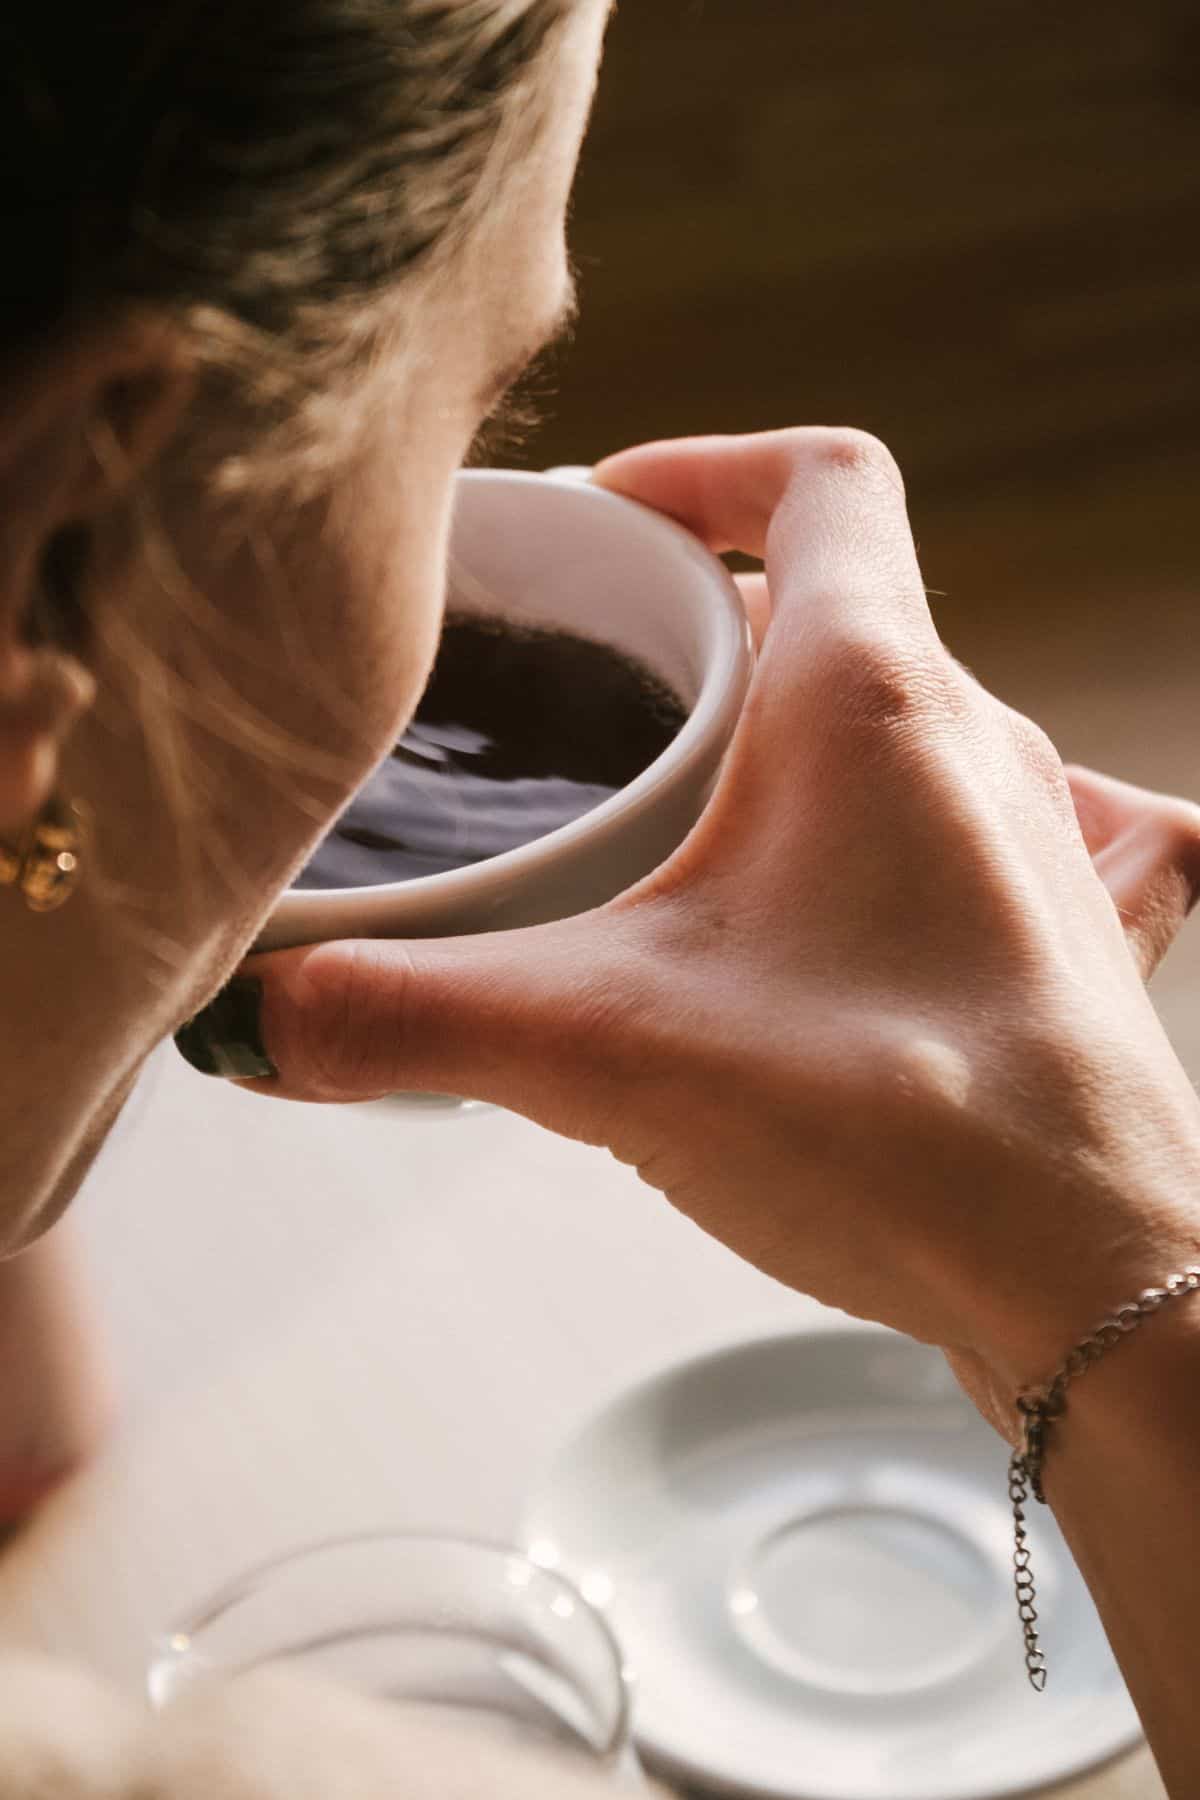 a woman drinking a cup of black coffee.